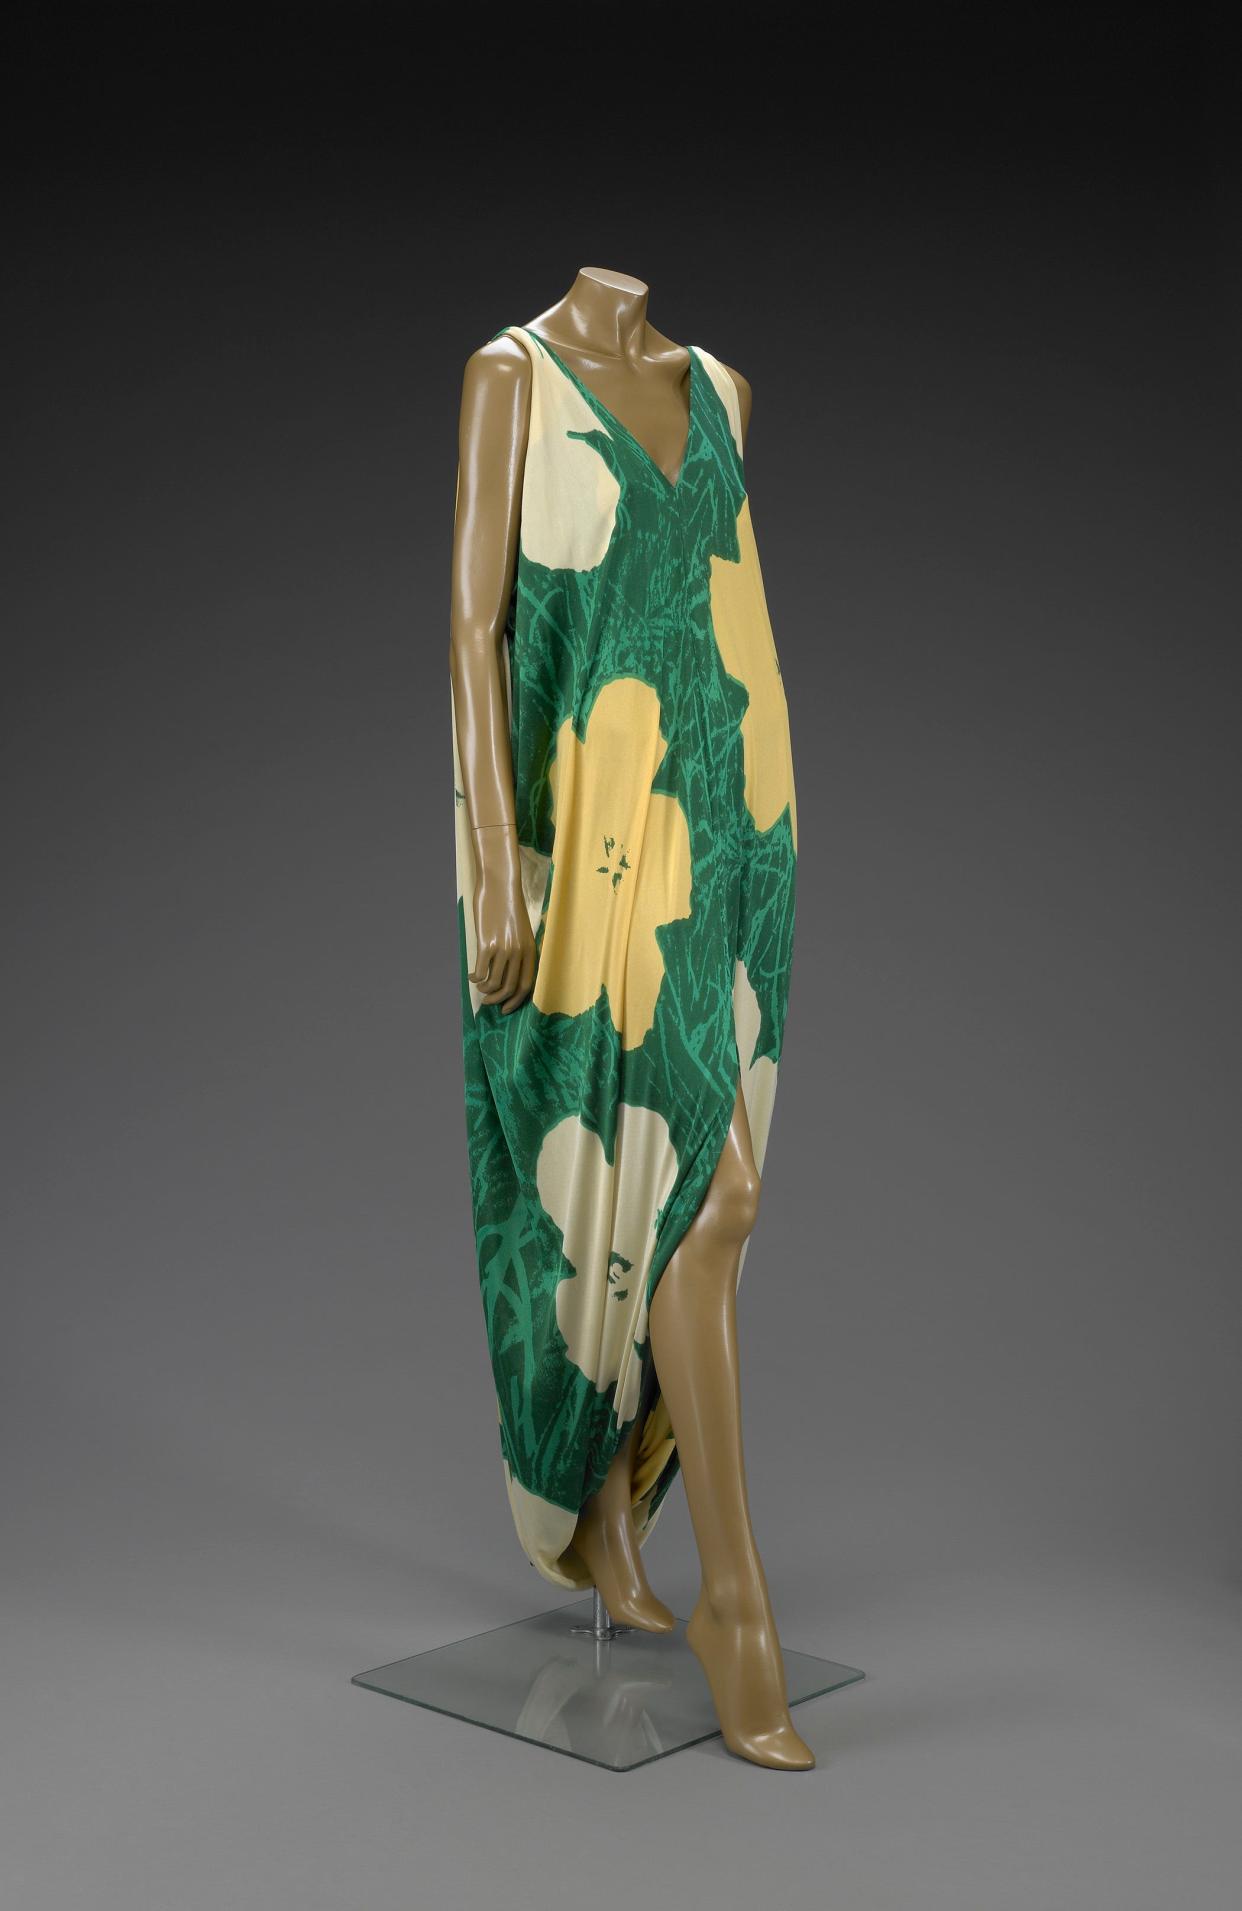 A Halston gown included in the Des Moines Art Center’s “Halston and Warhol: Silver and Suede” show.